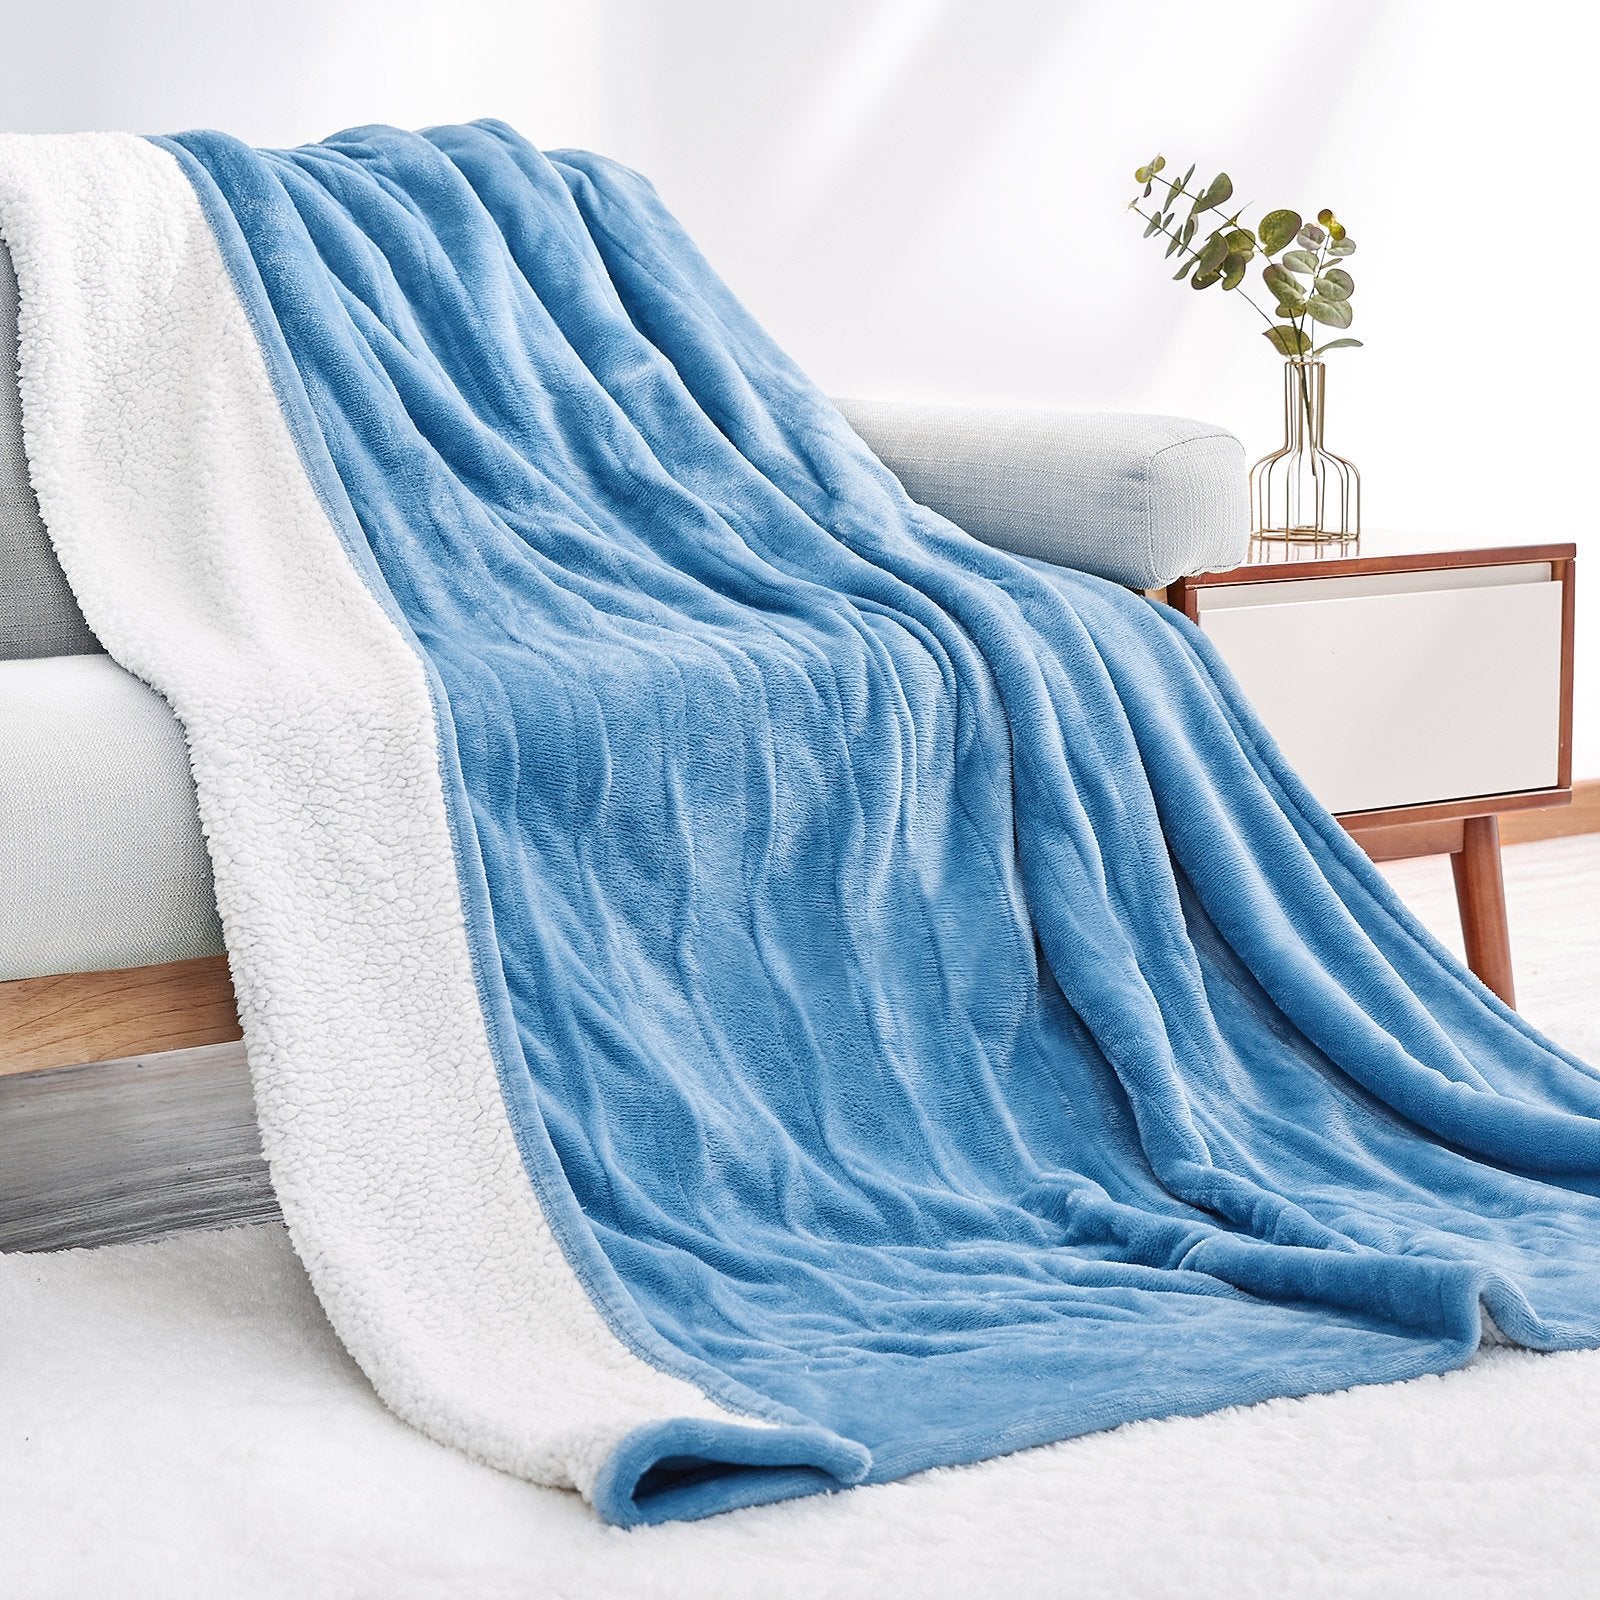 Maxkare Electric Blanket 72 x 84 Full Size Flannel Heated Throw Blan –  MAXKARE